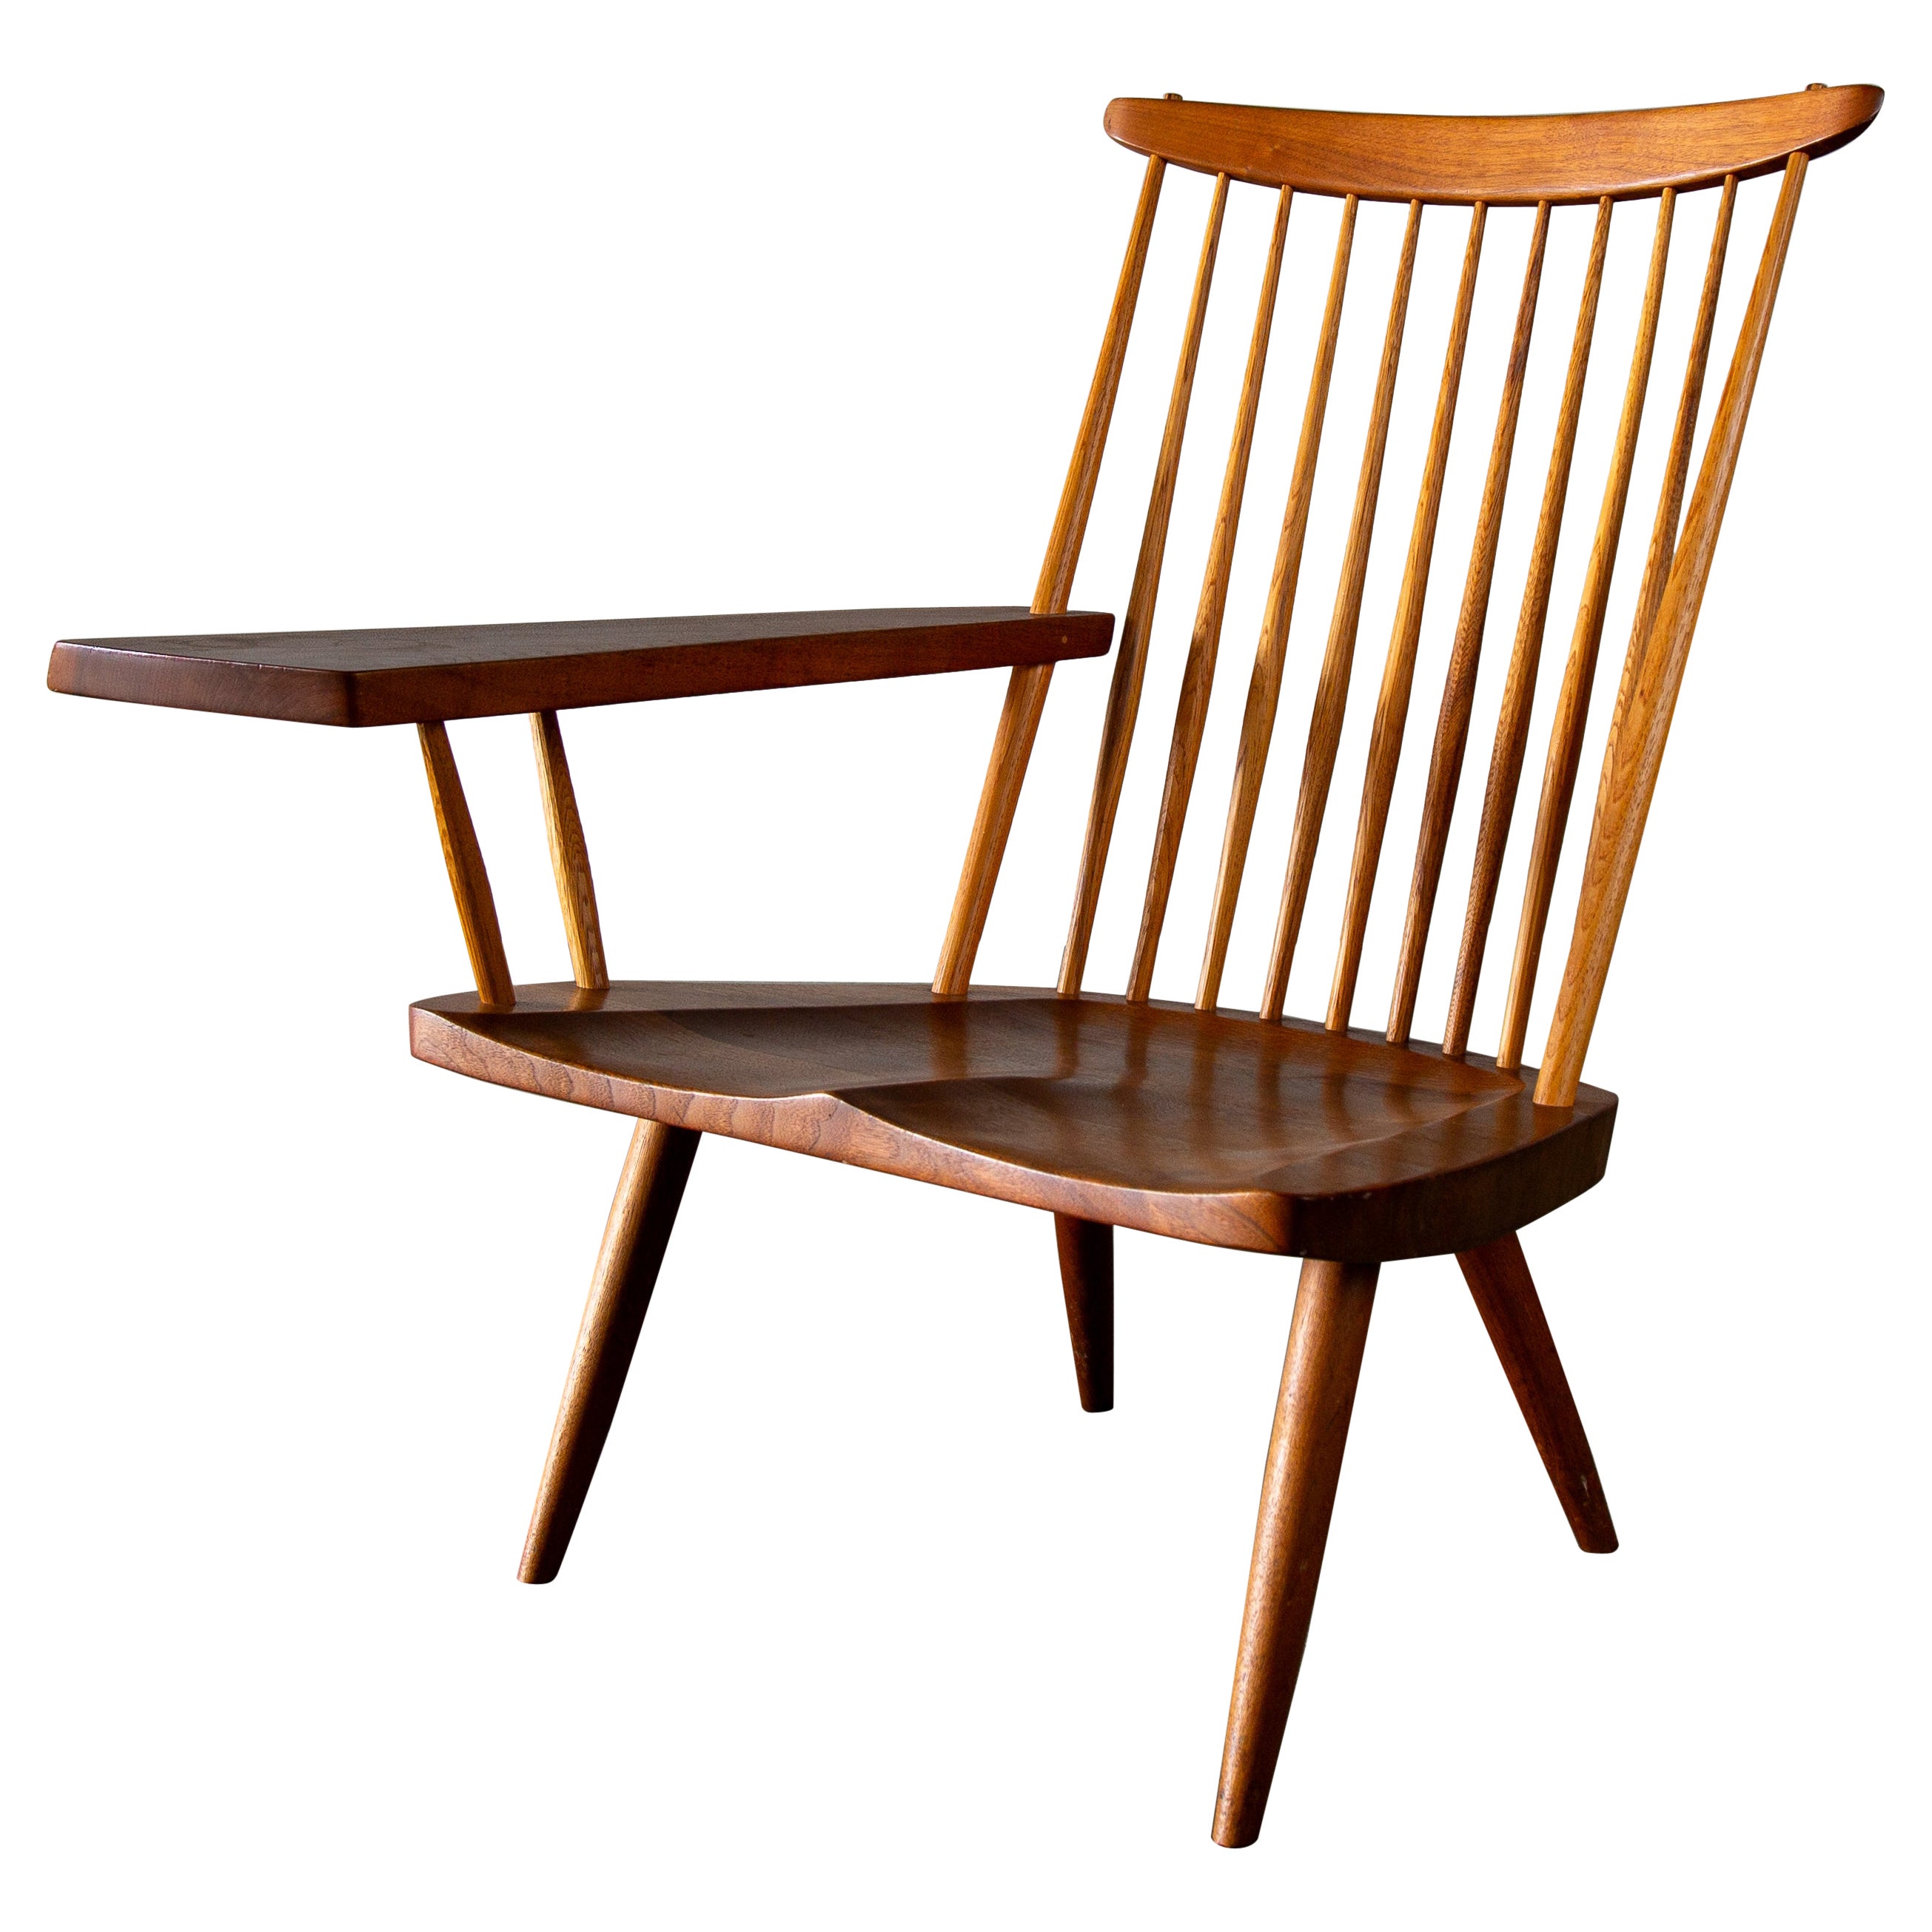 1975 George Nakashima Studio Lounge Chair with Free Form Arm Walnut and Hickory For Sale